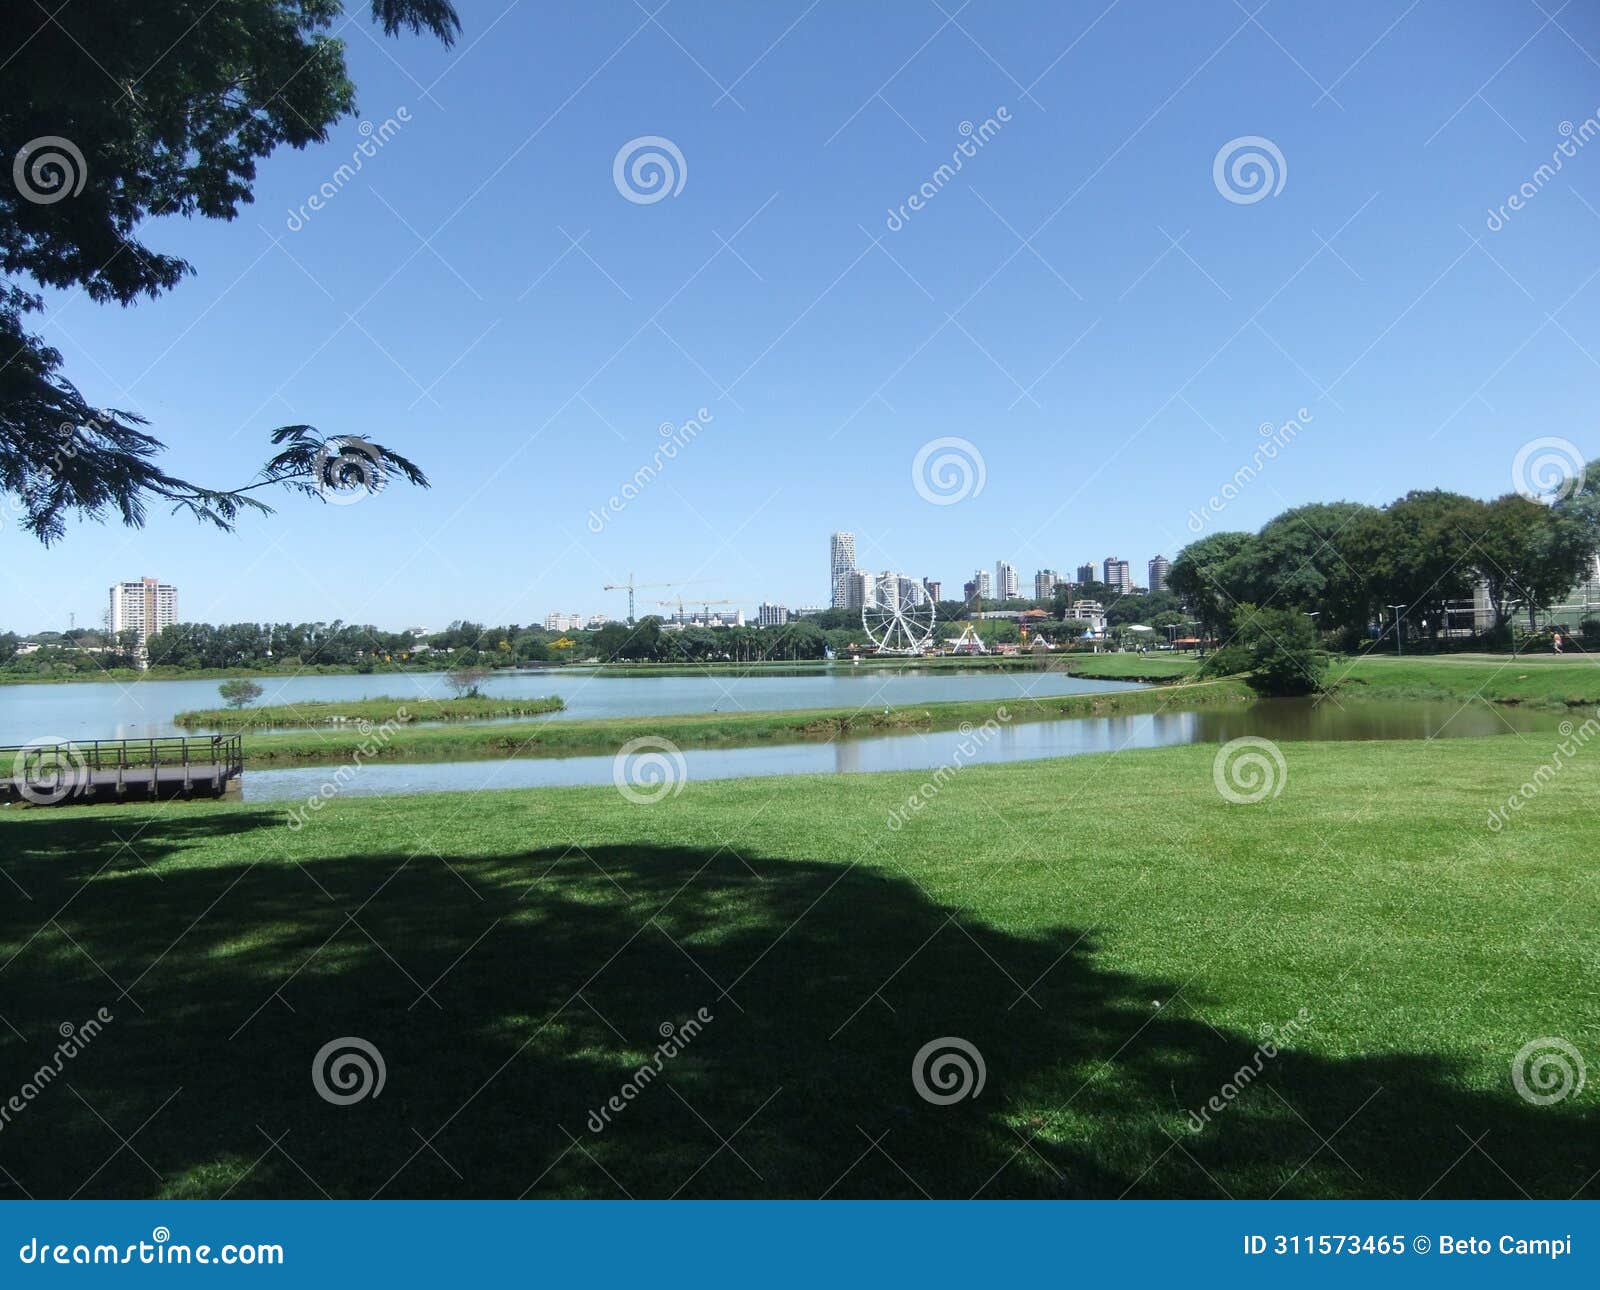 barigui park with blue sky, buildings in the background, trees and plants, lake